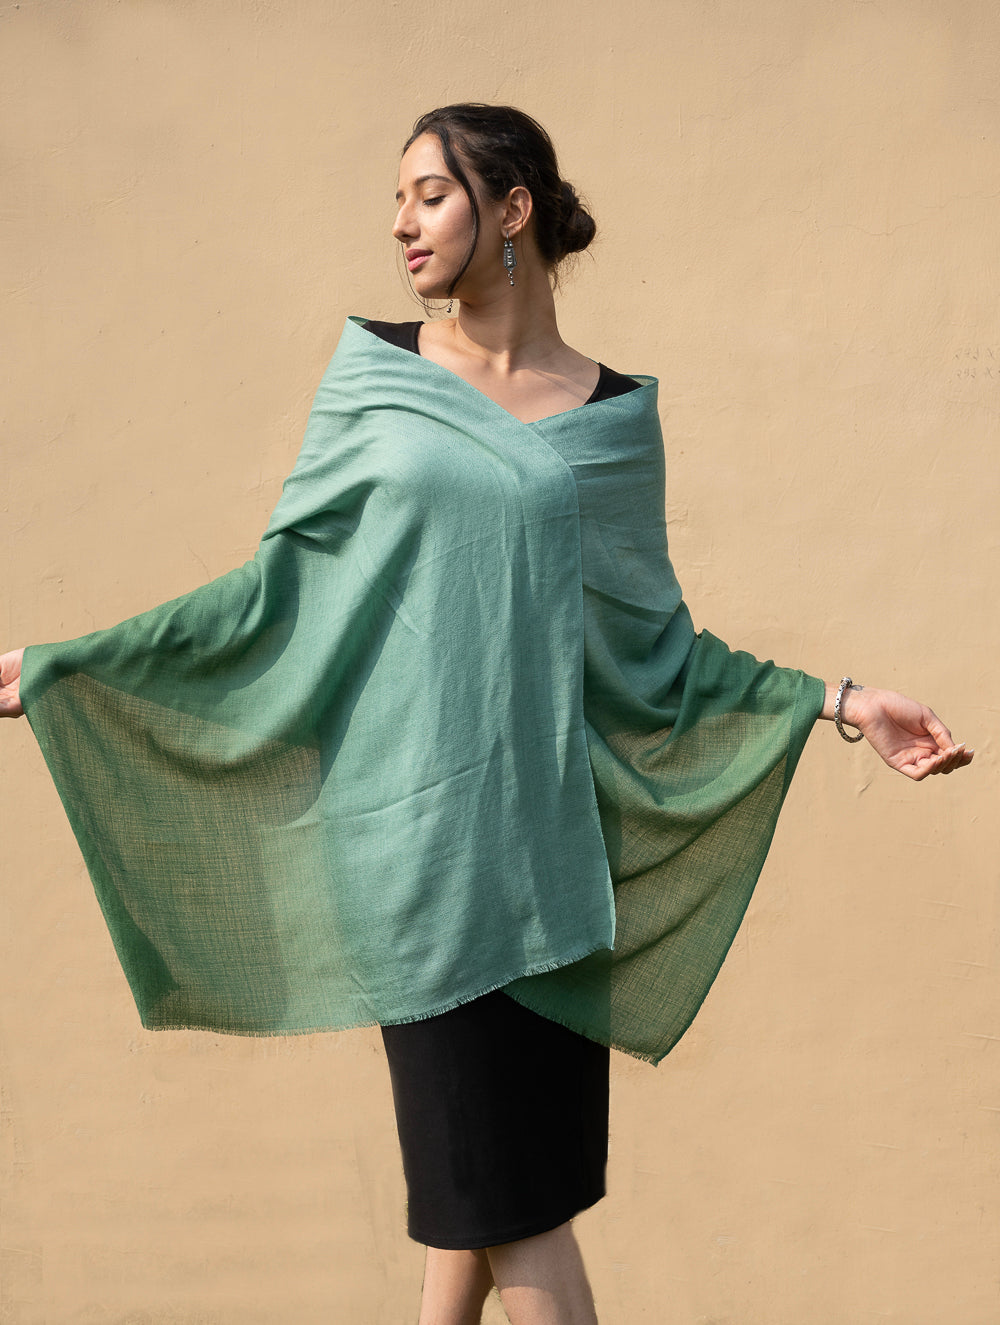 Load image into Gallery viewer, Fine, Soft Kashmiri Ombre Wool Stole - Shaded Sea Green